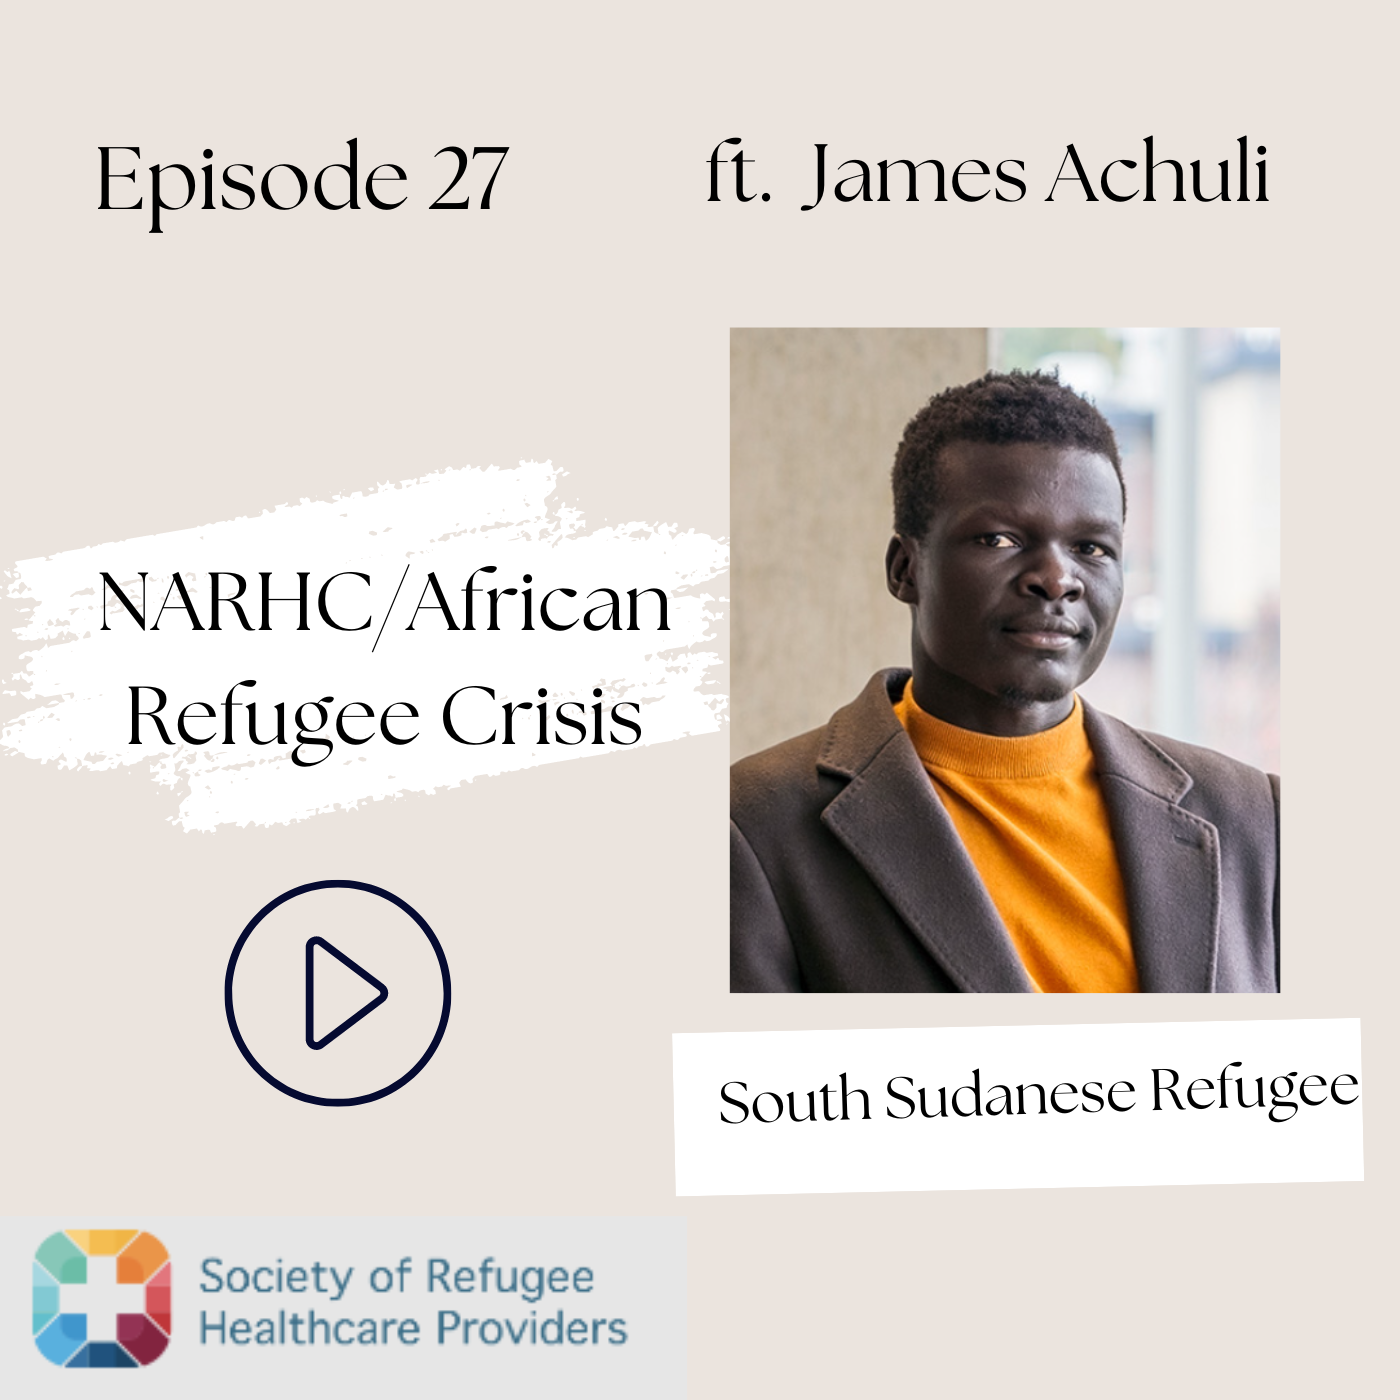 Refugee Series/Humanity Amidst Chaos: The Resilience and Determination of James Achuli, a South Sudanese Refugee (Ep 27)